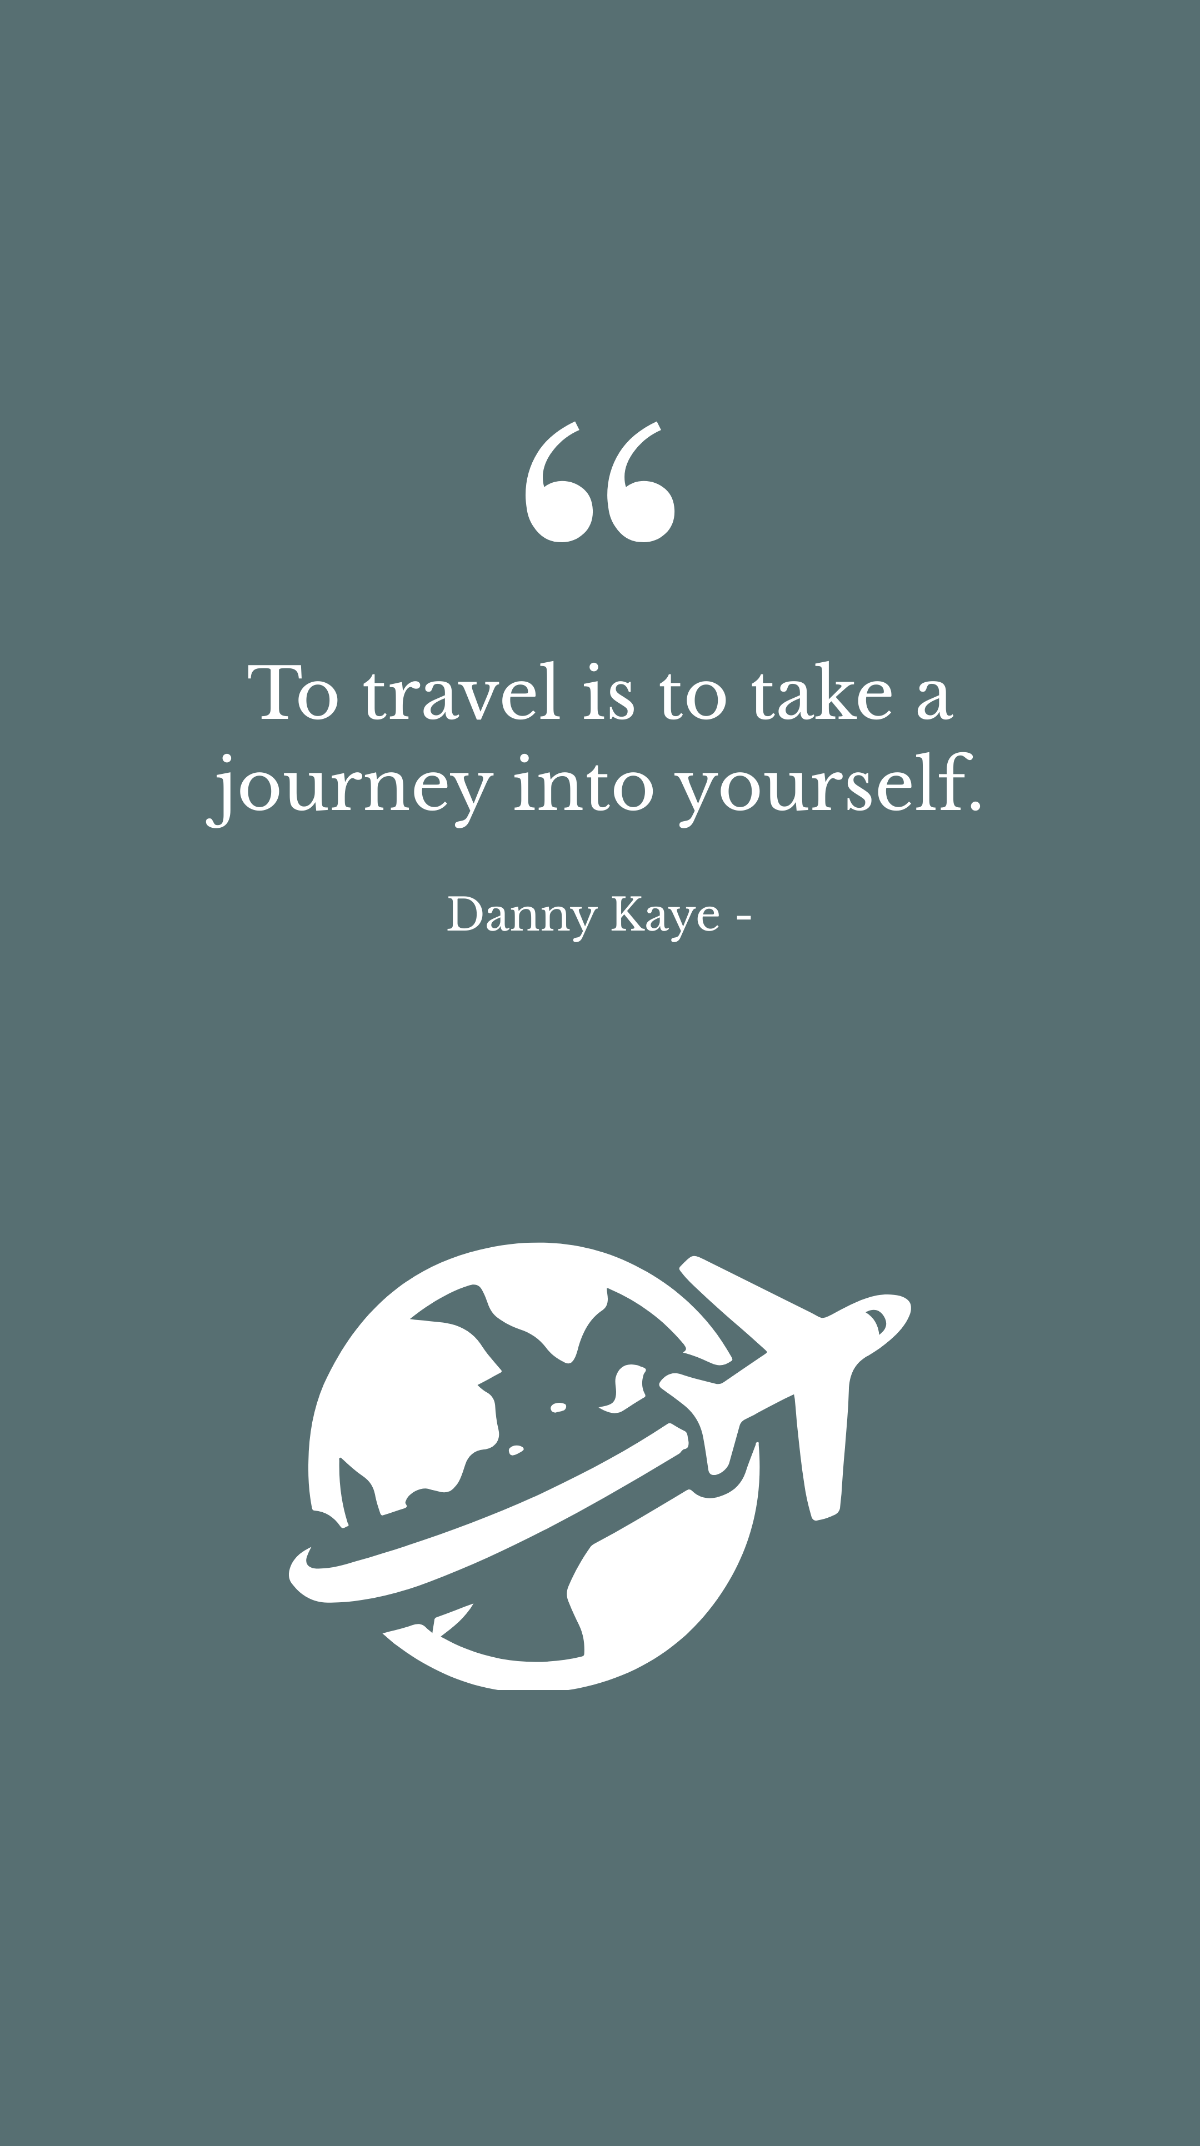 Danny Kaye - To travel is to take a journey into yourself. Template